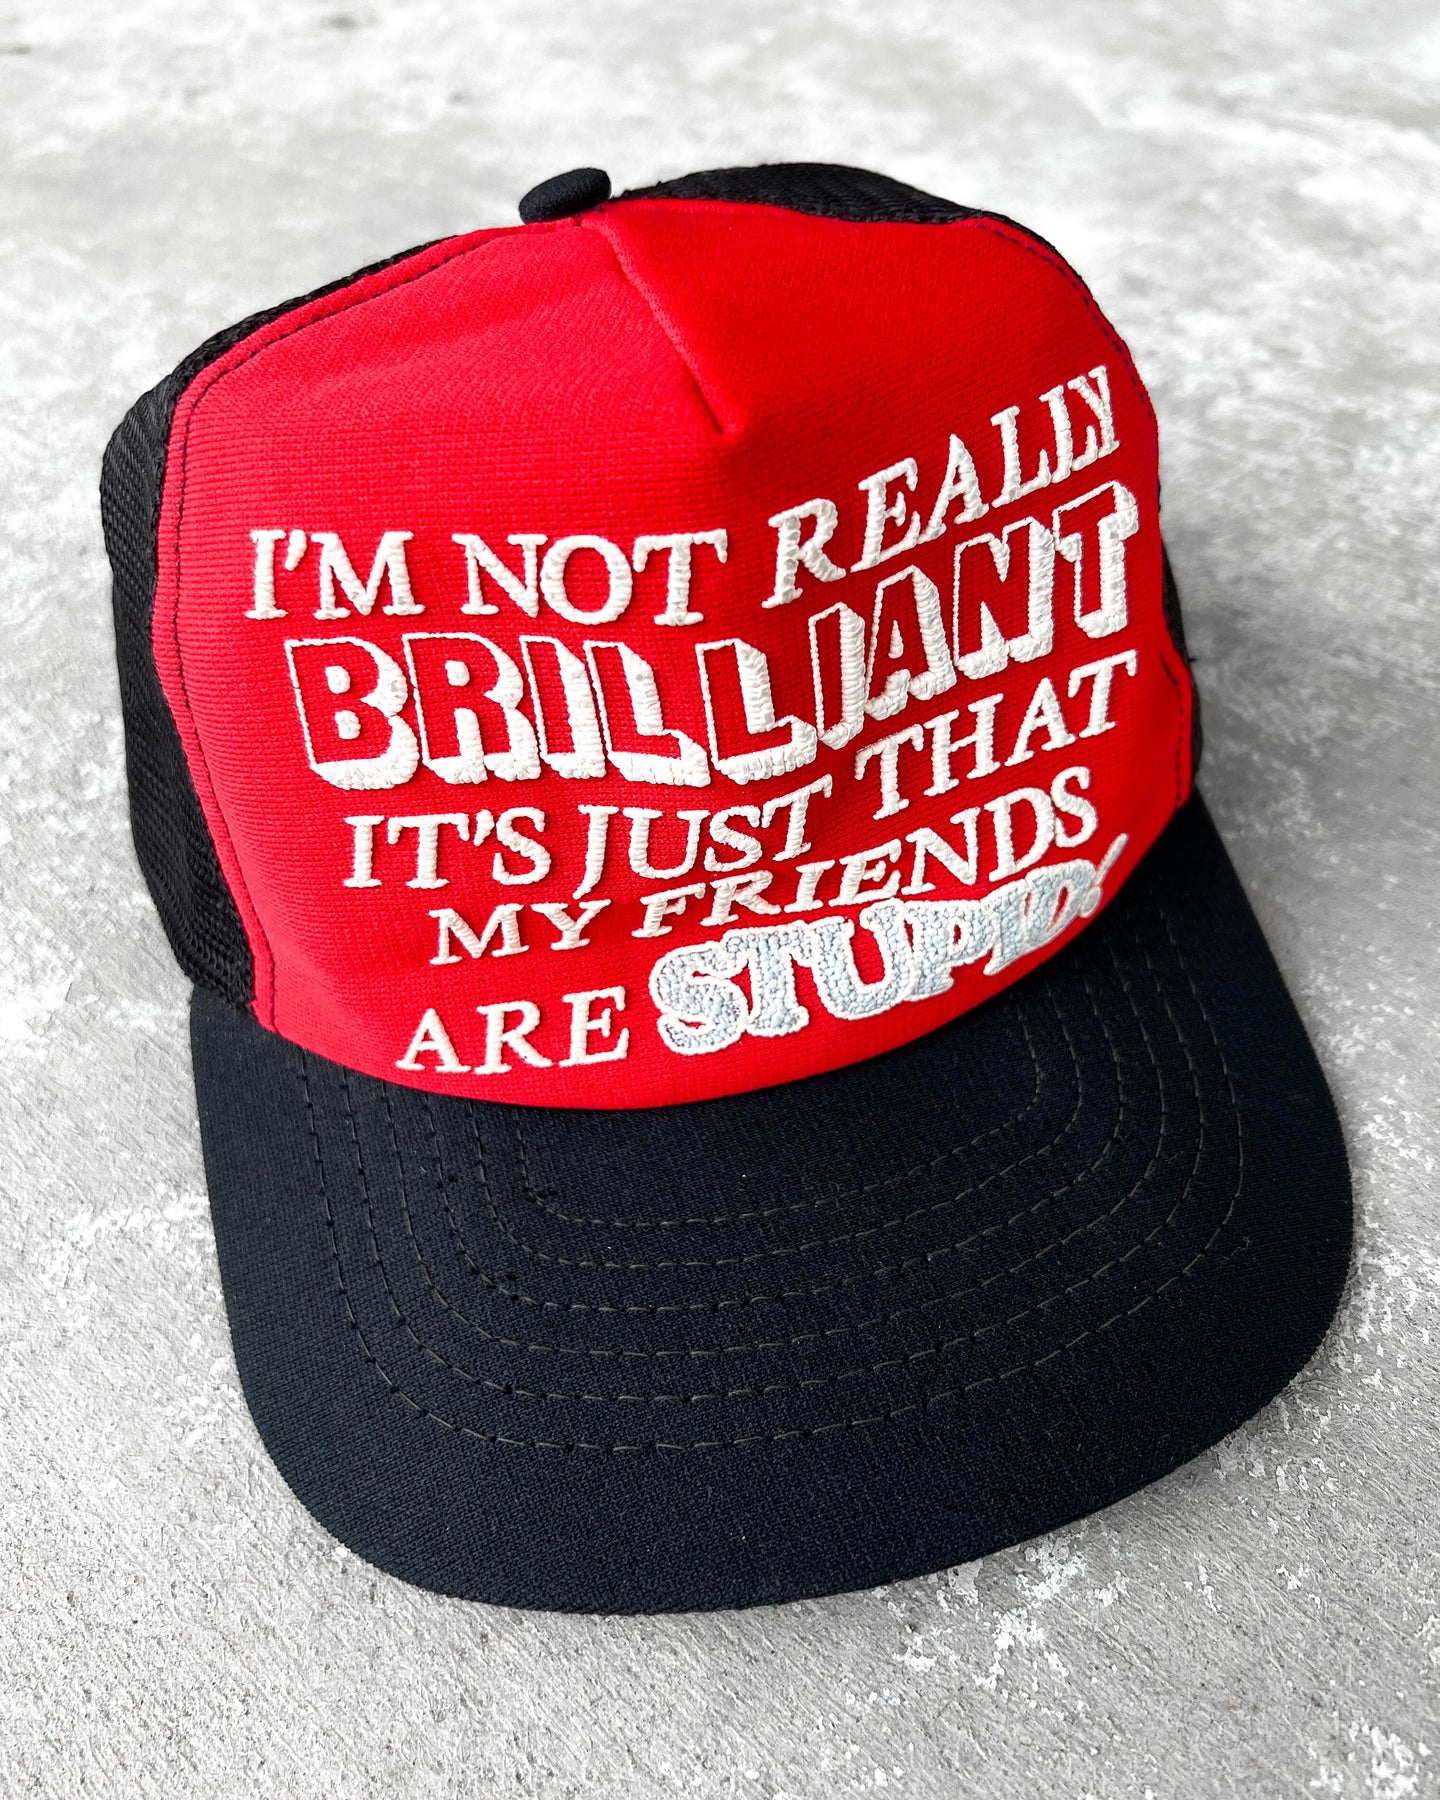 1980s My Friends Are Stupid Snapback Trucker Hat - One Size